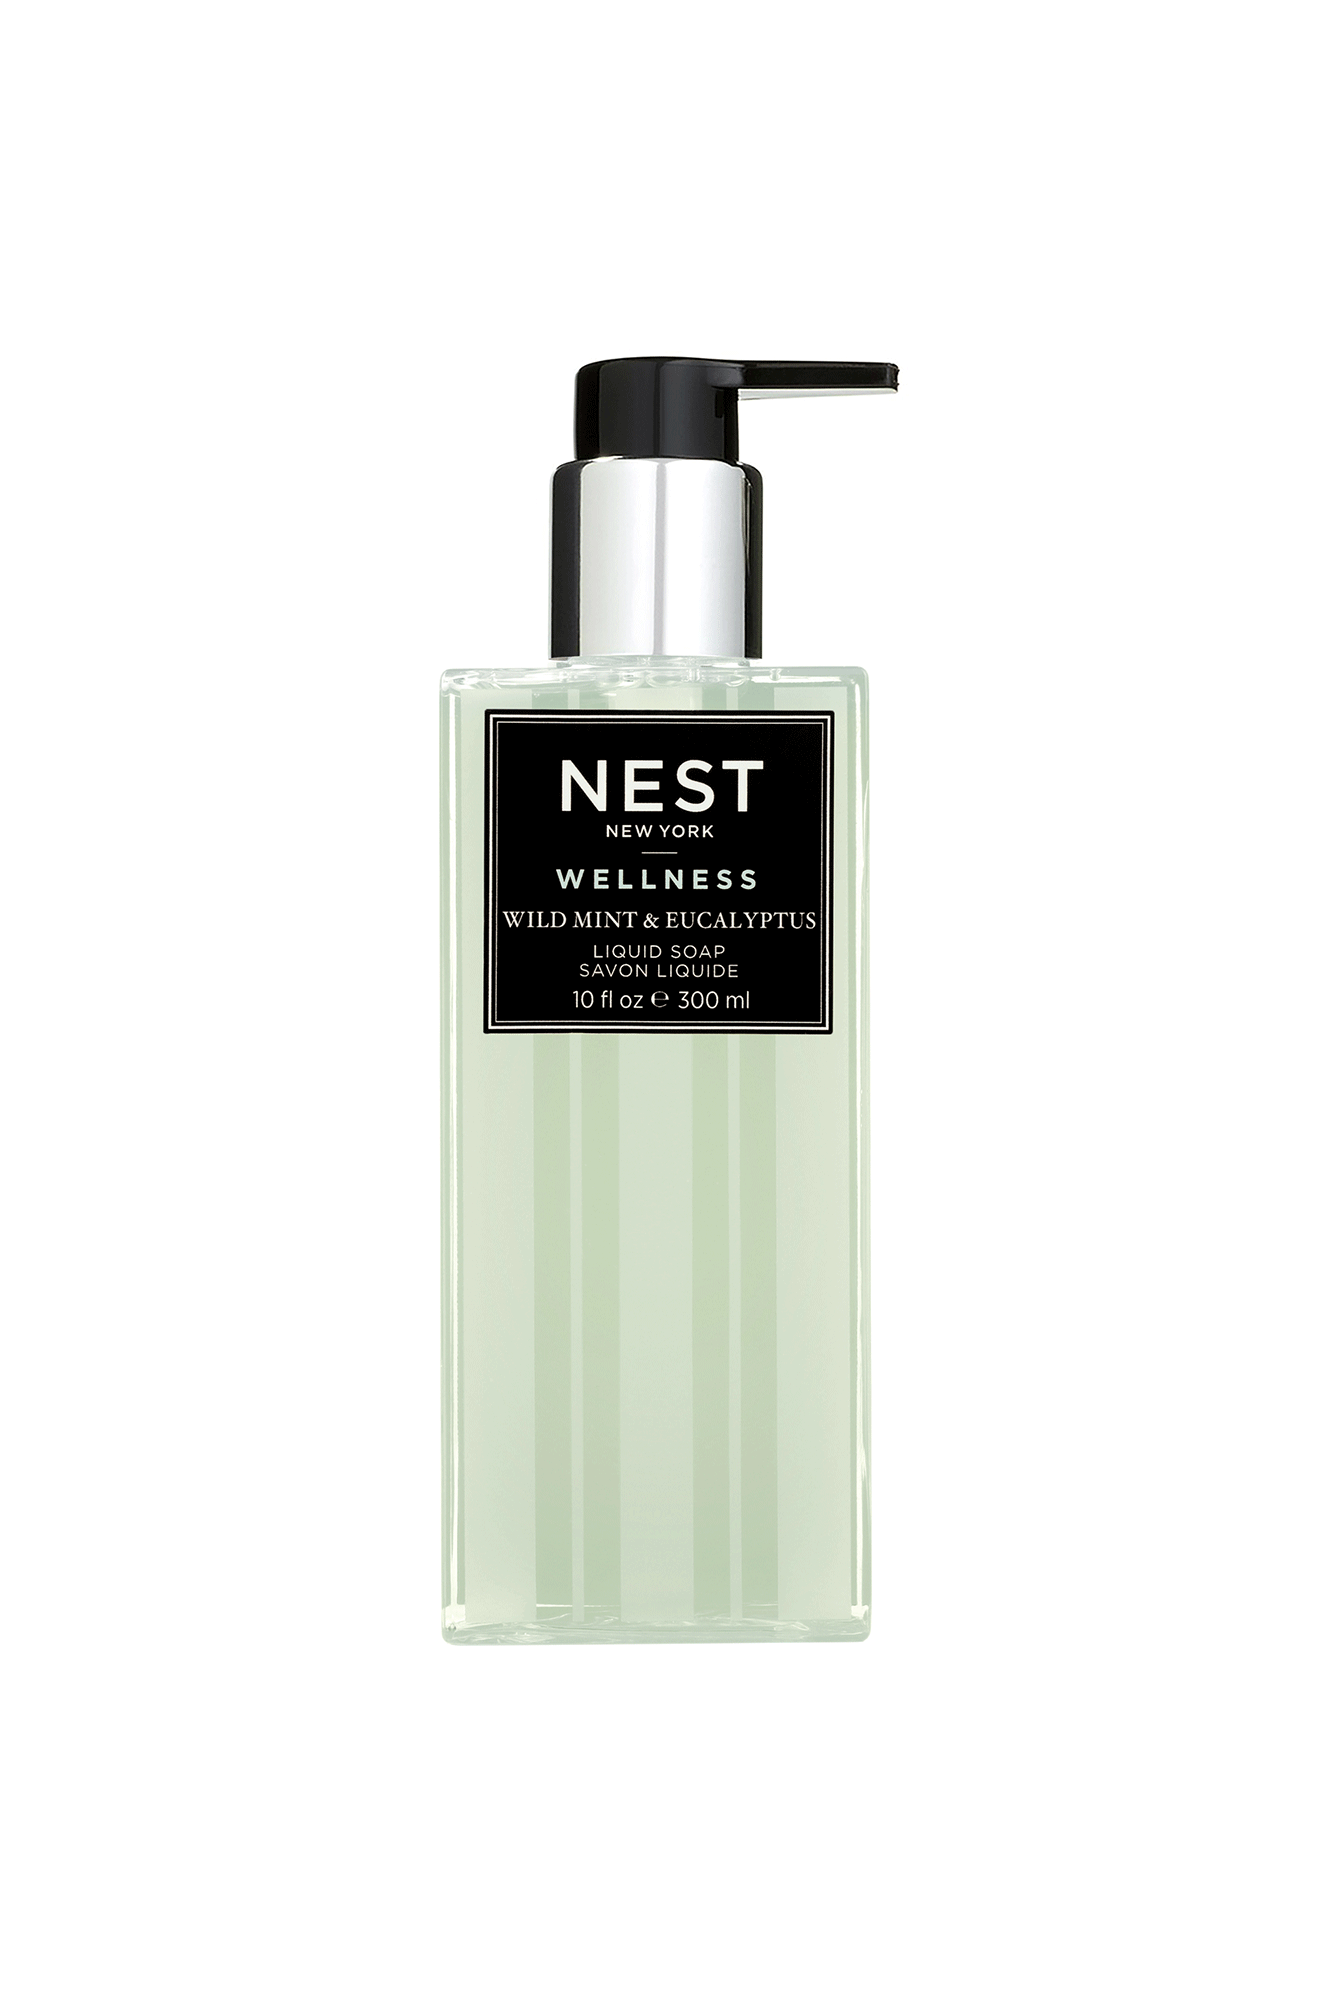 Cleanse and invigorate your skin with our luxurious Wild Mint & Eucalyptus Liquid Soap from Nest. Soothing wild mint, eucalyptus, basil and Thai ginger create an aromatic blend to clear the mind and awaken the senses. With 300 pumps per bottle, this liquid soap is a refreshing and long-lasting indulgence.